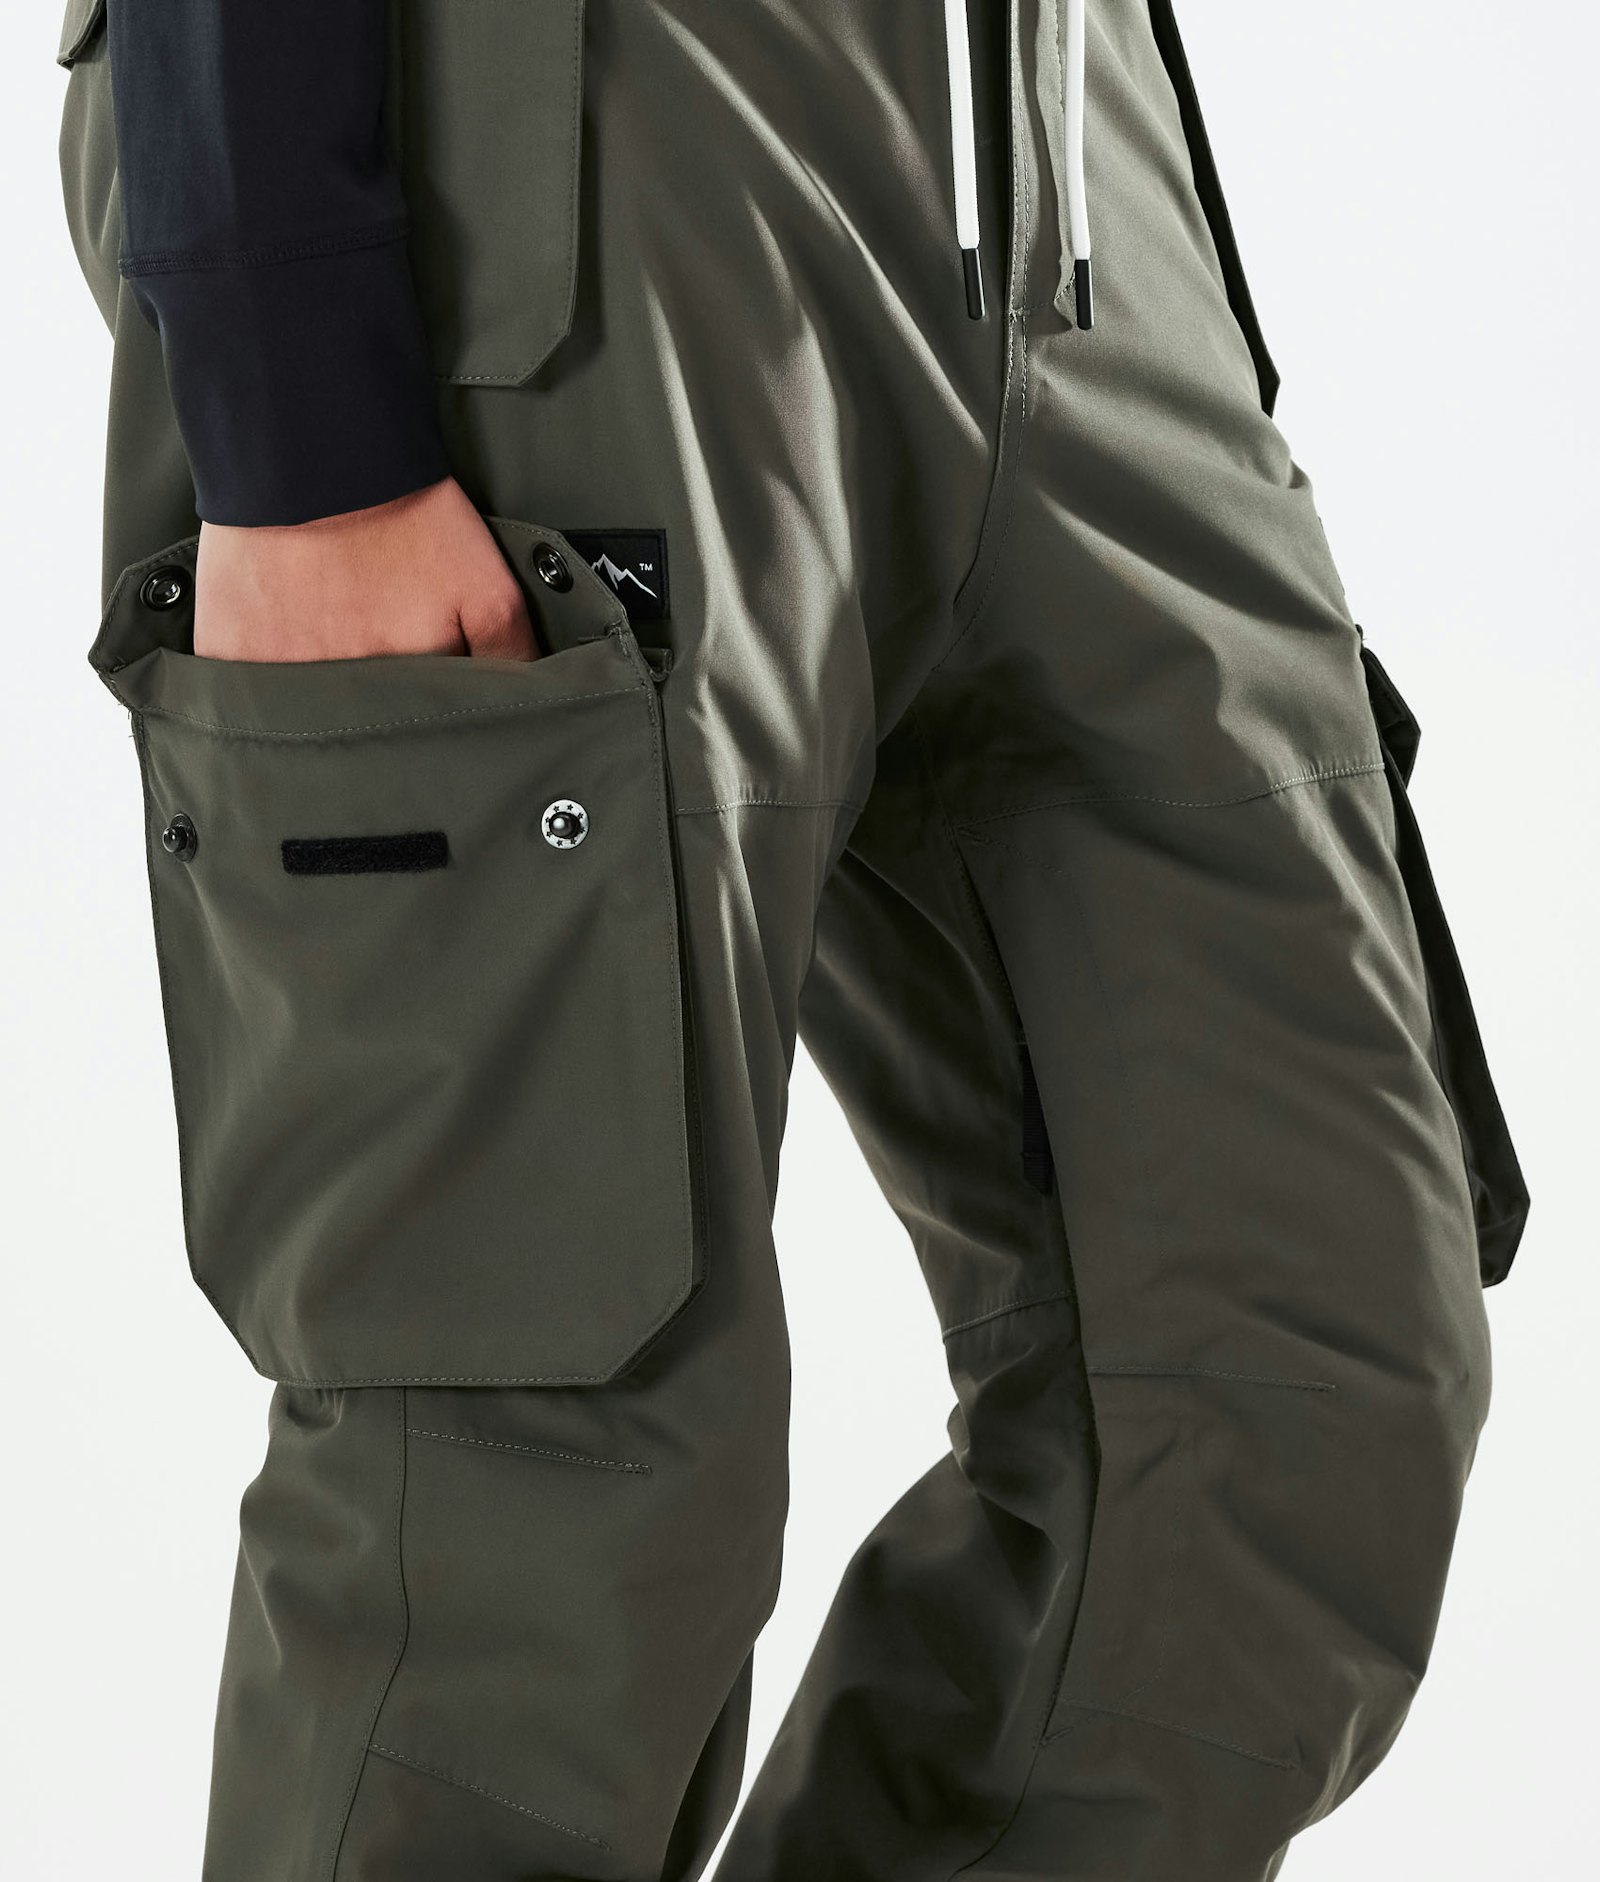 Iconic W 2021 Snowboard Pants Women Olive Green, Image 5 of 6